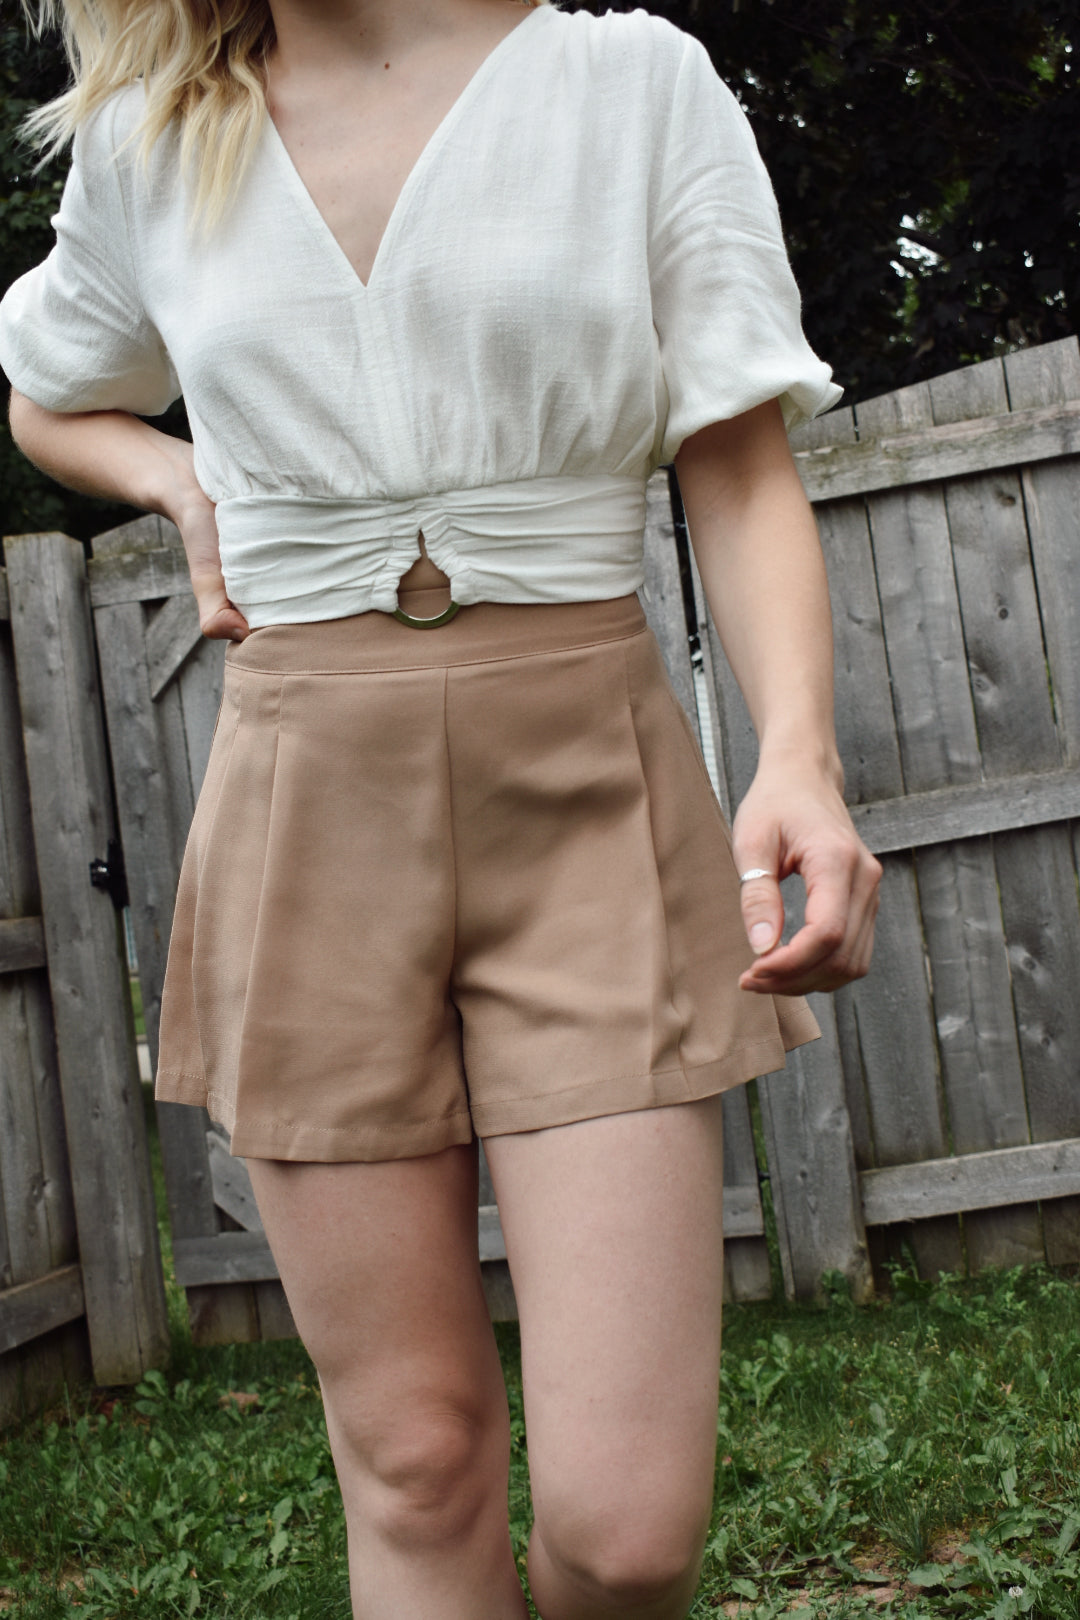 High waisted mocha pleated dress shorts with zipper enclosure on side fitted band on top. The brand is Mittoshop.